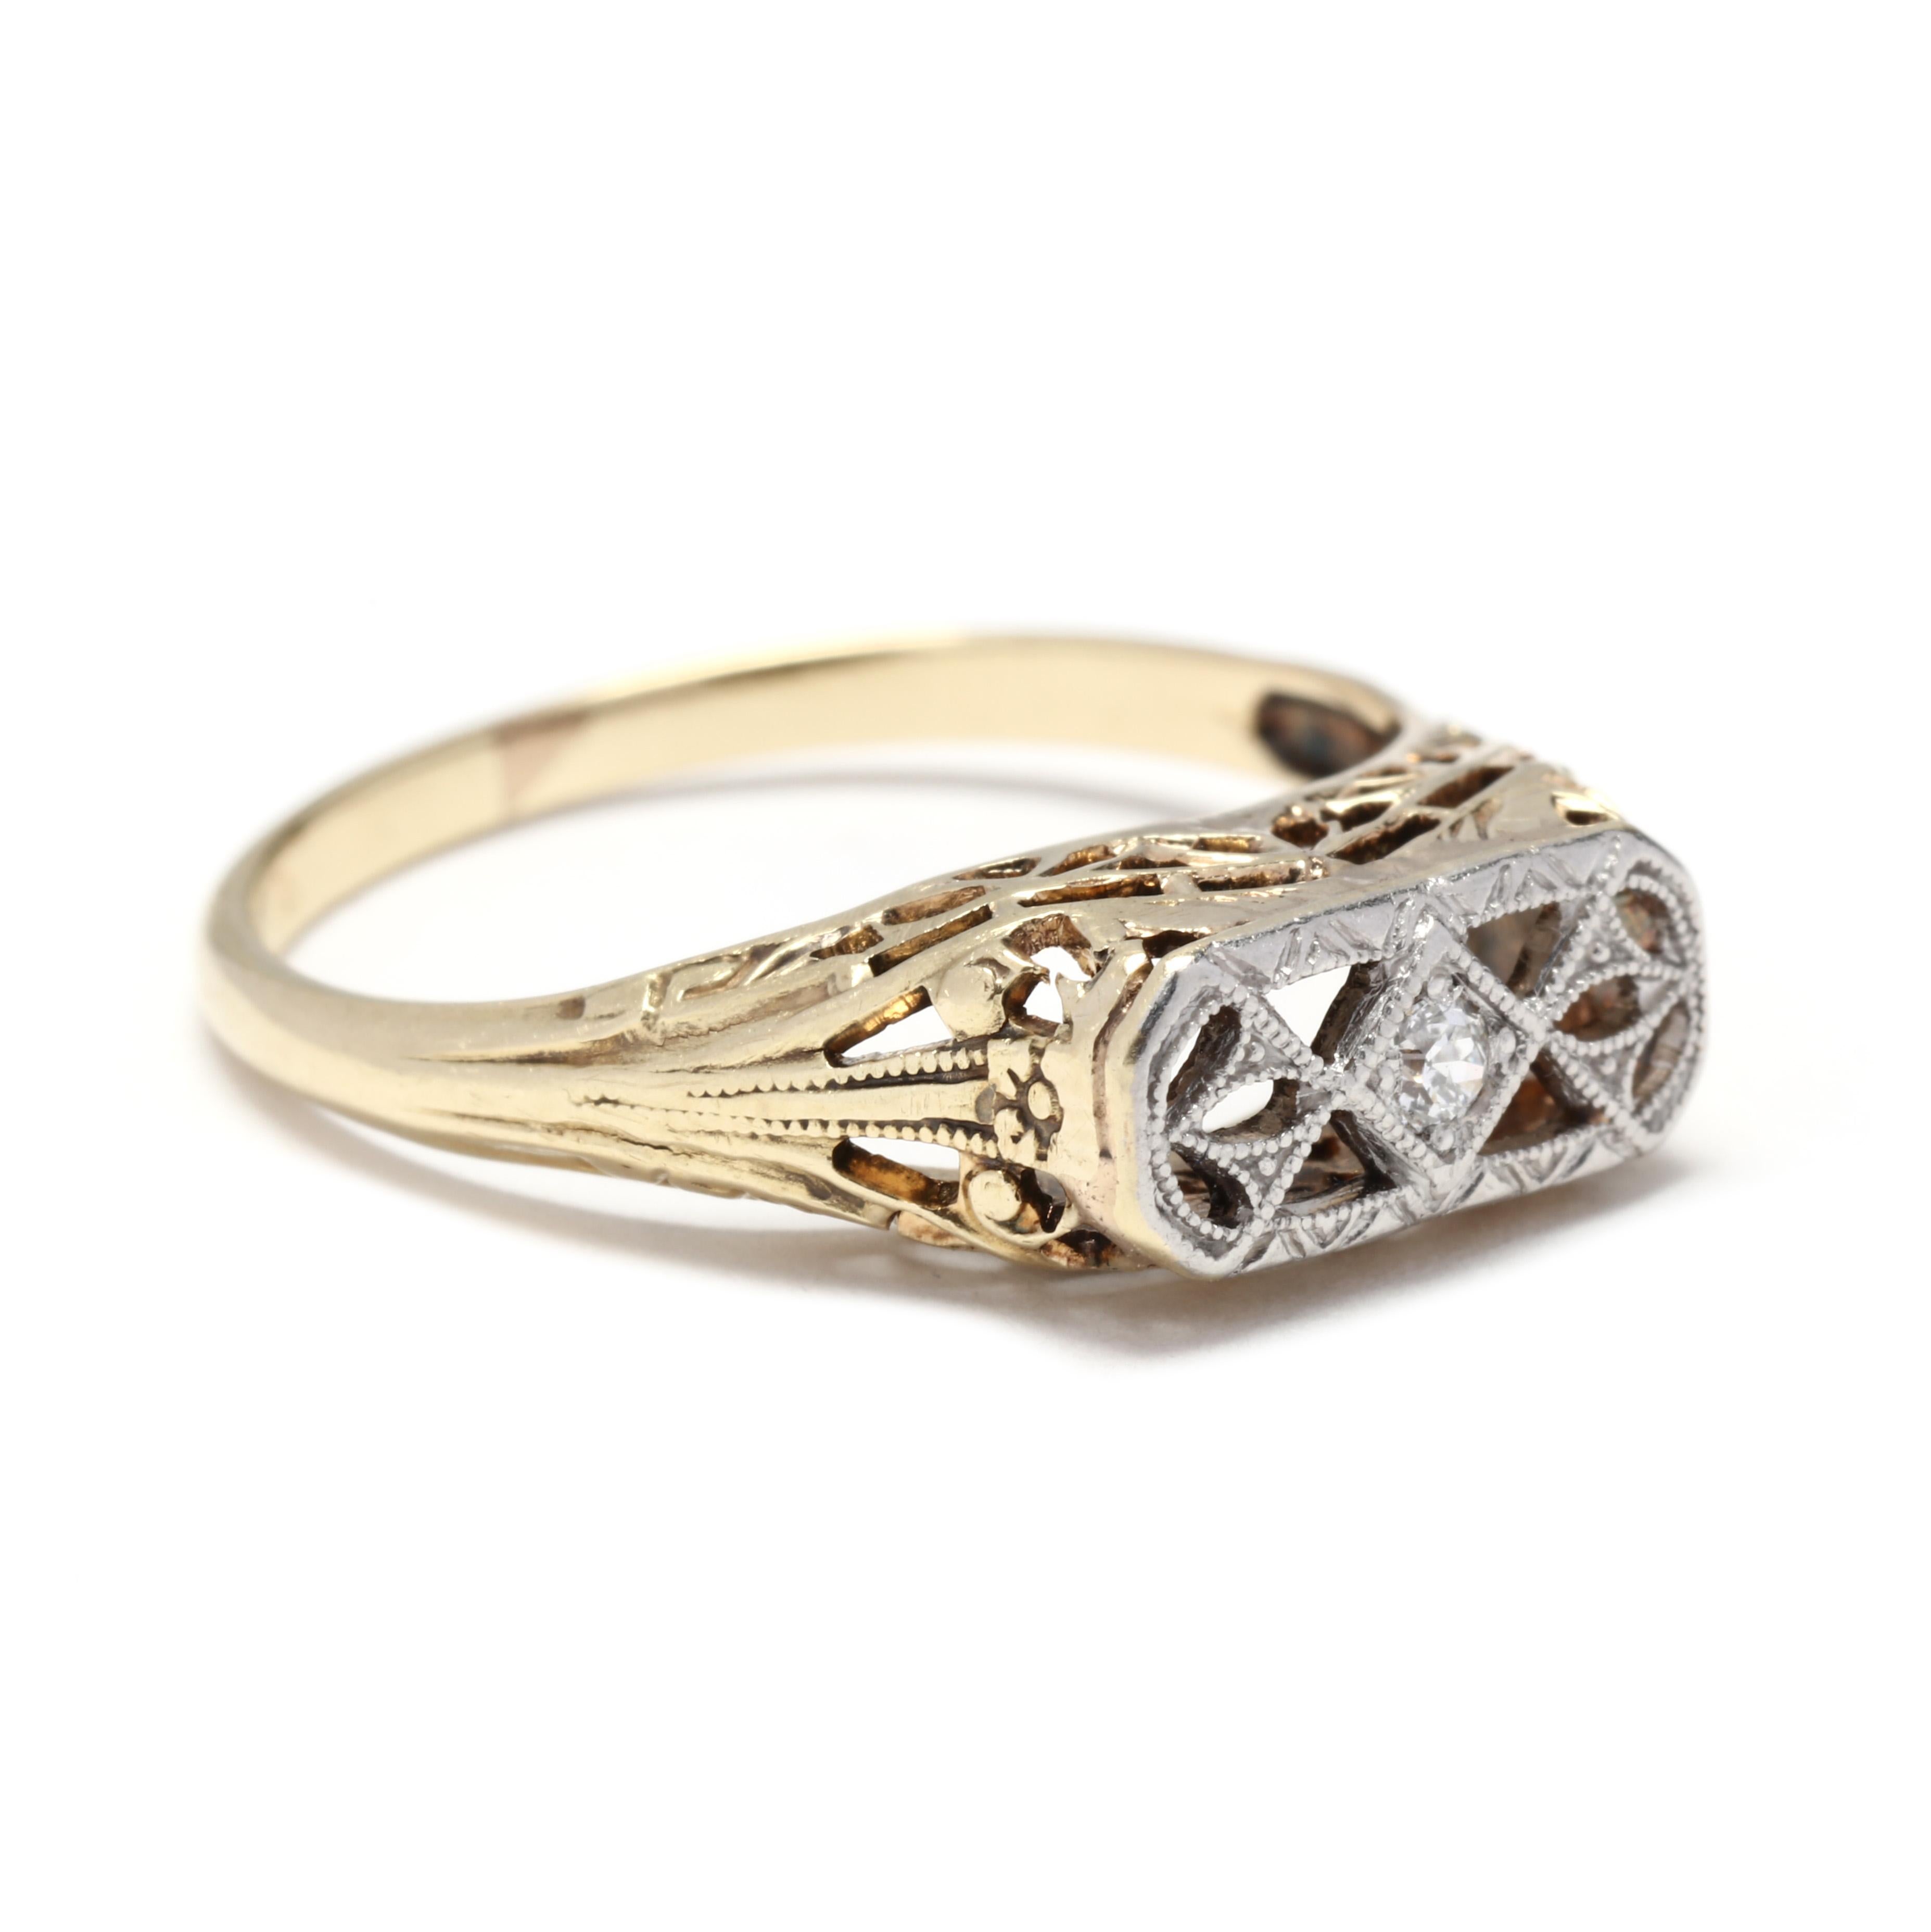 An antique Edwardian 14 karat yellow and white gold diamond filigree ring. This ring features a white gold, rectangular top design set with an old European cut diamond, with foliate filigree and engraving on the profile and shank.



Stones:

-